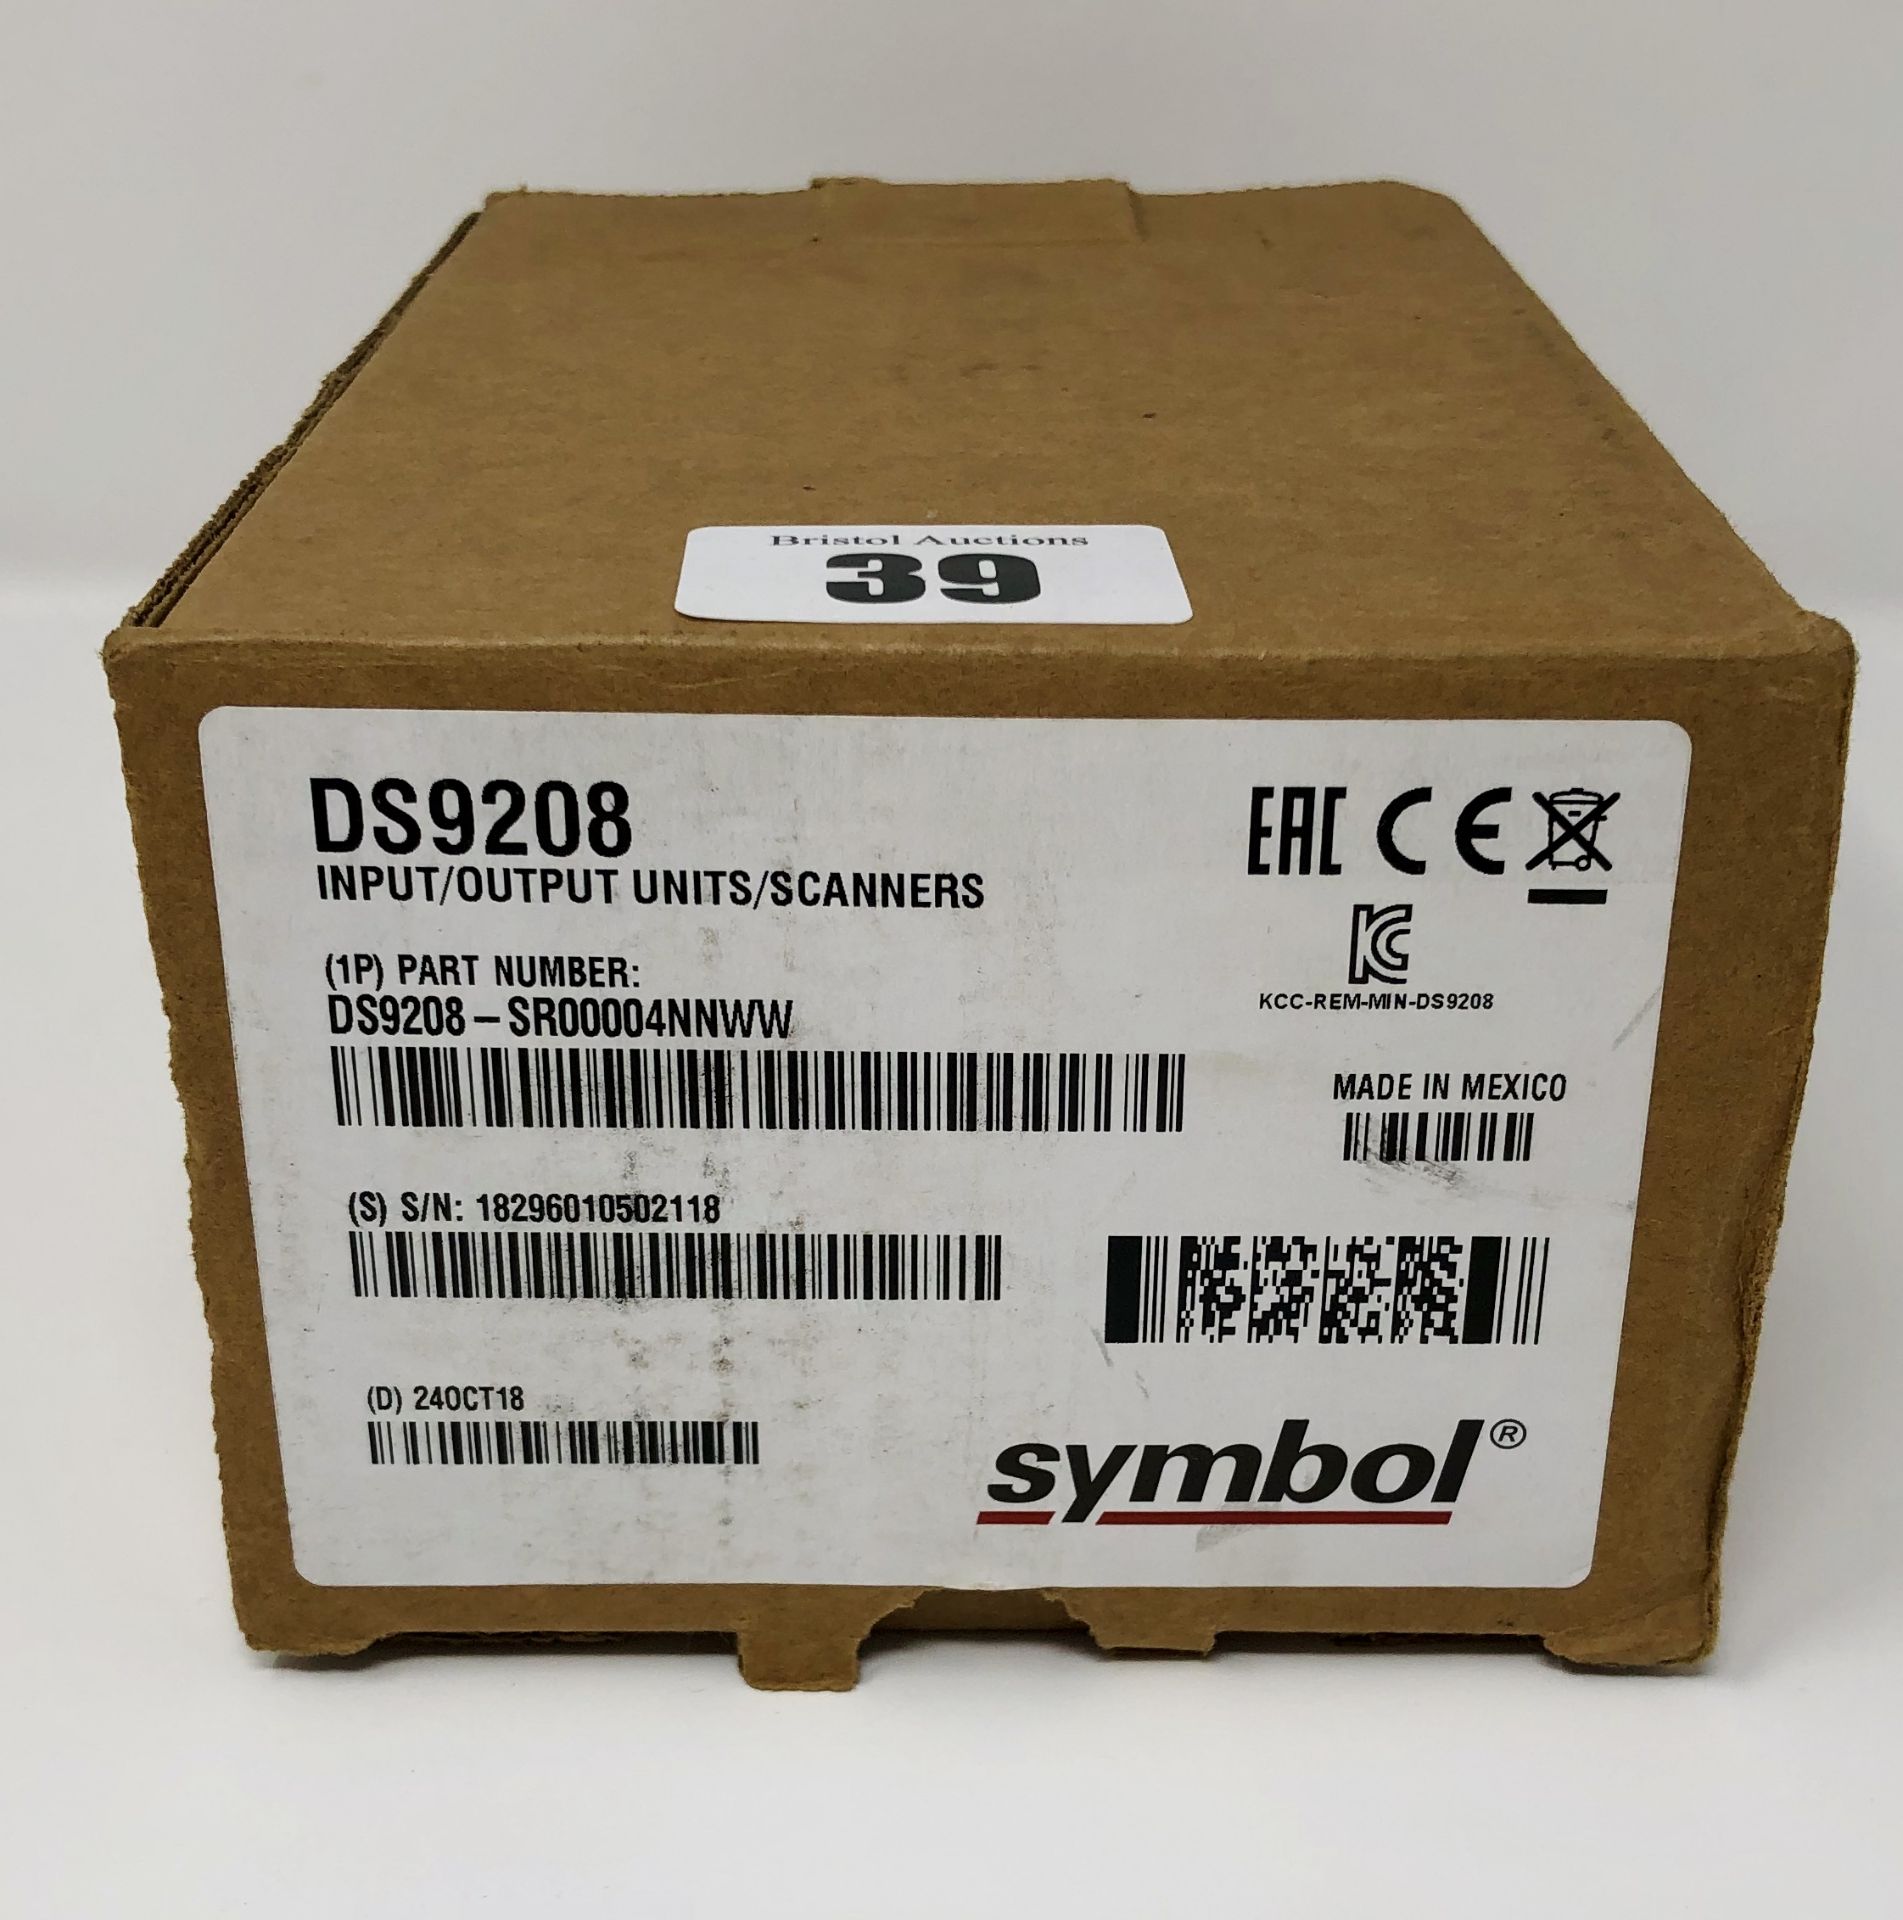 A boxed as new Symbol DS9208-SR00004NNWW Barcode Scanner (Box and inner packaging opened).